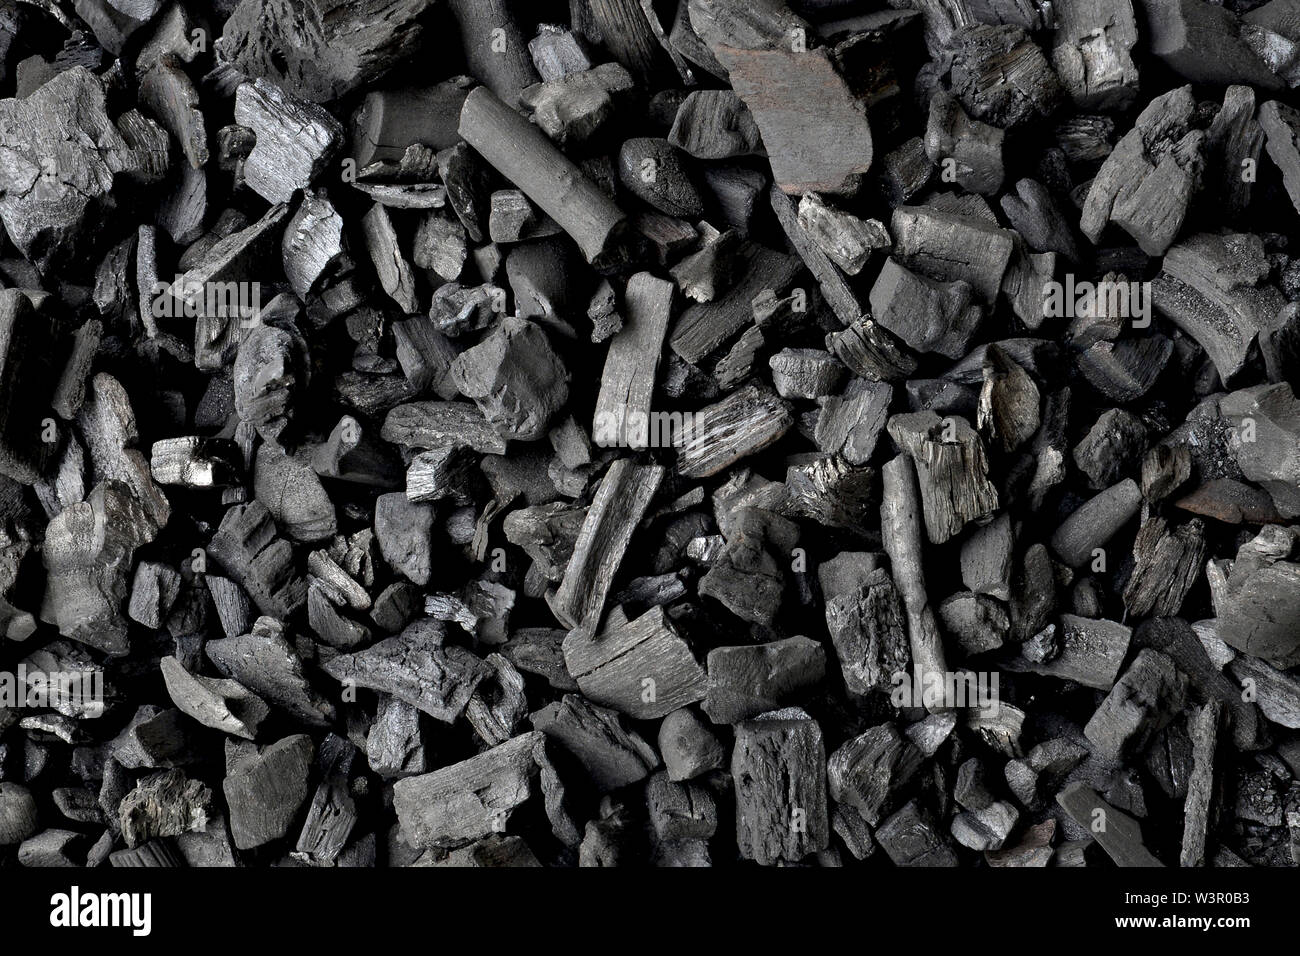 Charcoal for barbecuing, small pieces. Germany Stock Photo